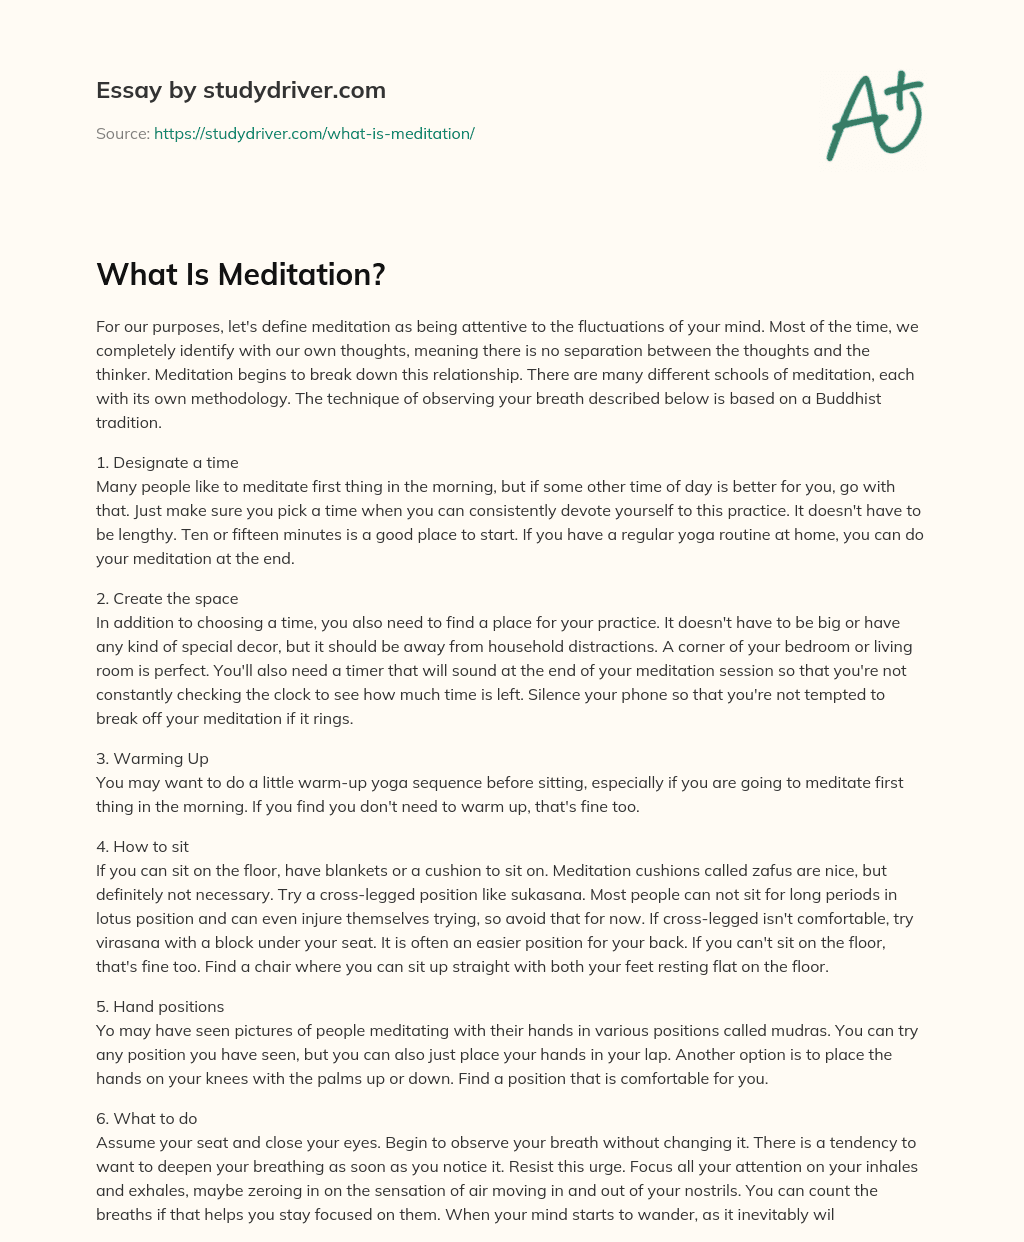 What is Meditation? essay